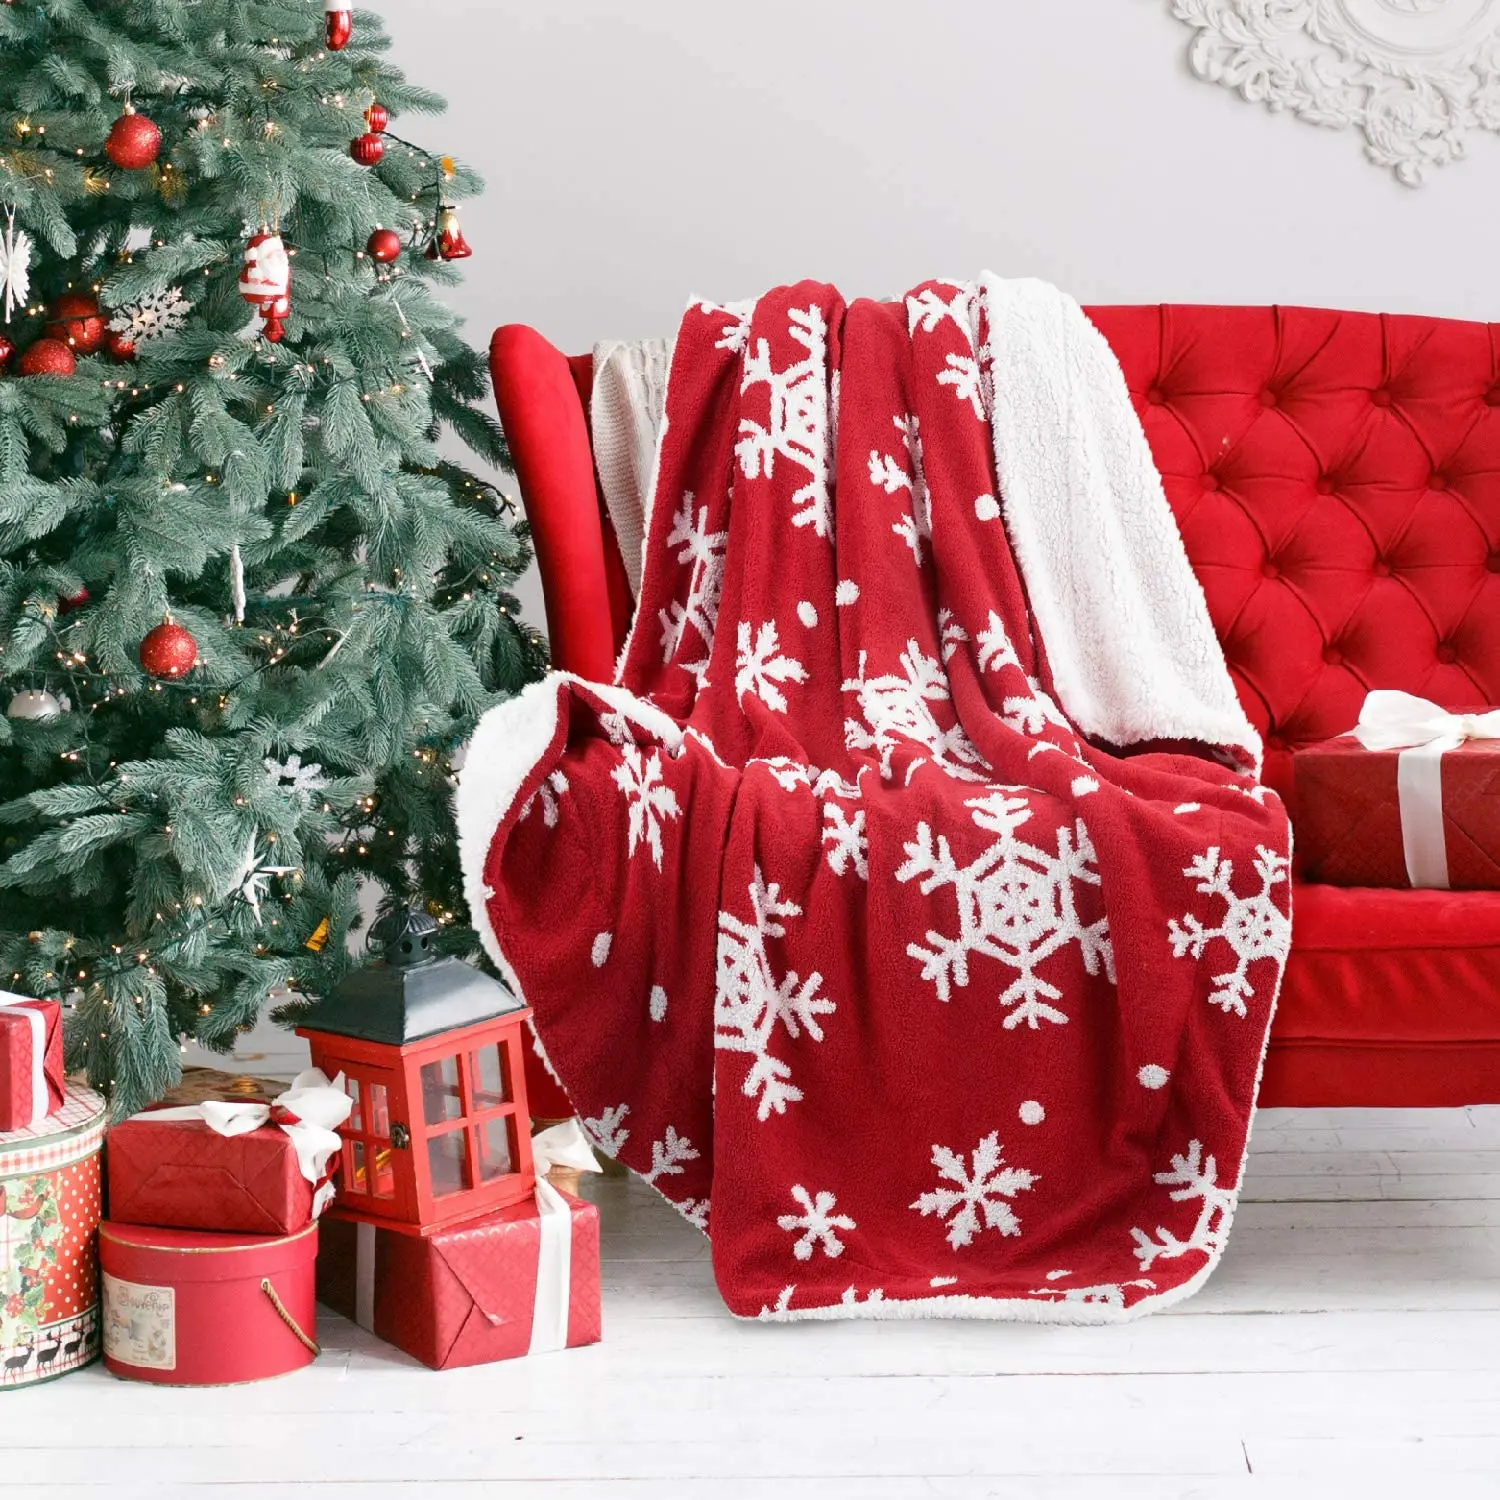 

Bedsure Christmas Holiday Sherpa Fleece Throw Blanket Snowflake Red and White Fuzzy Warm Couch Sofa and Gift 50x60 inches